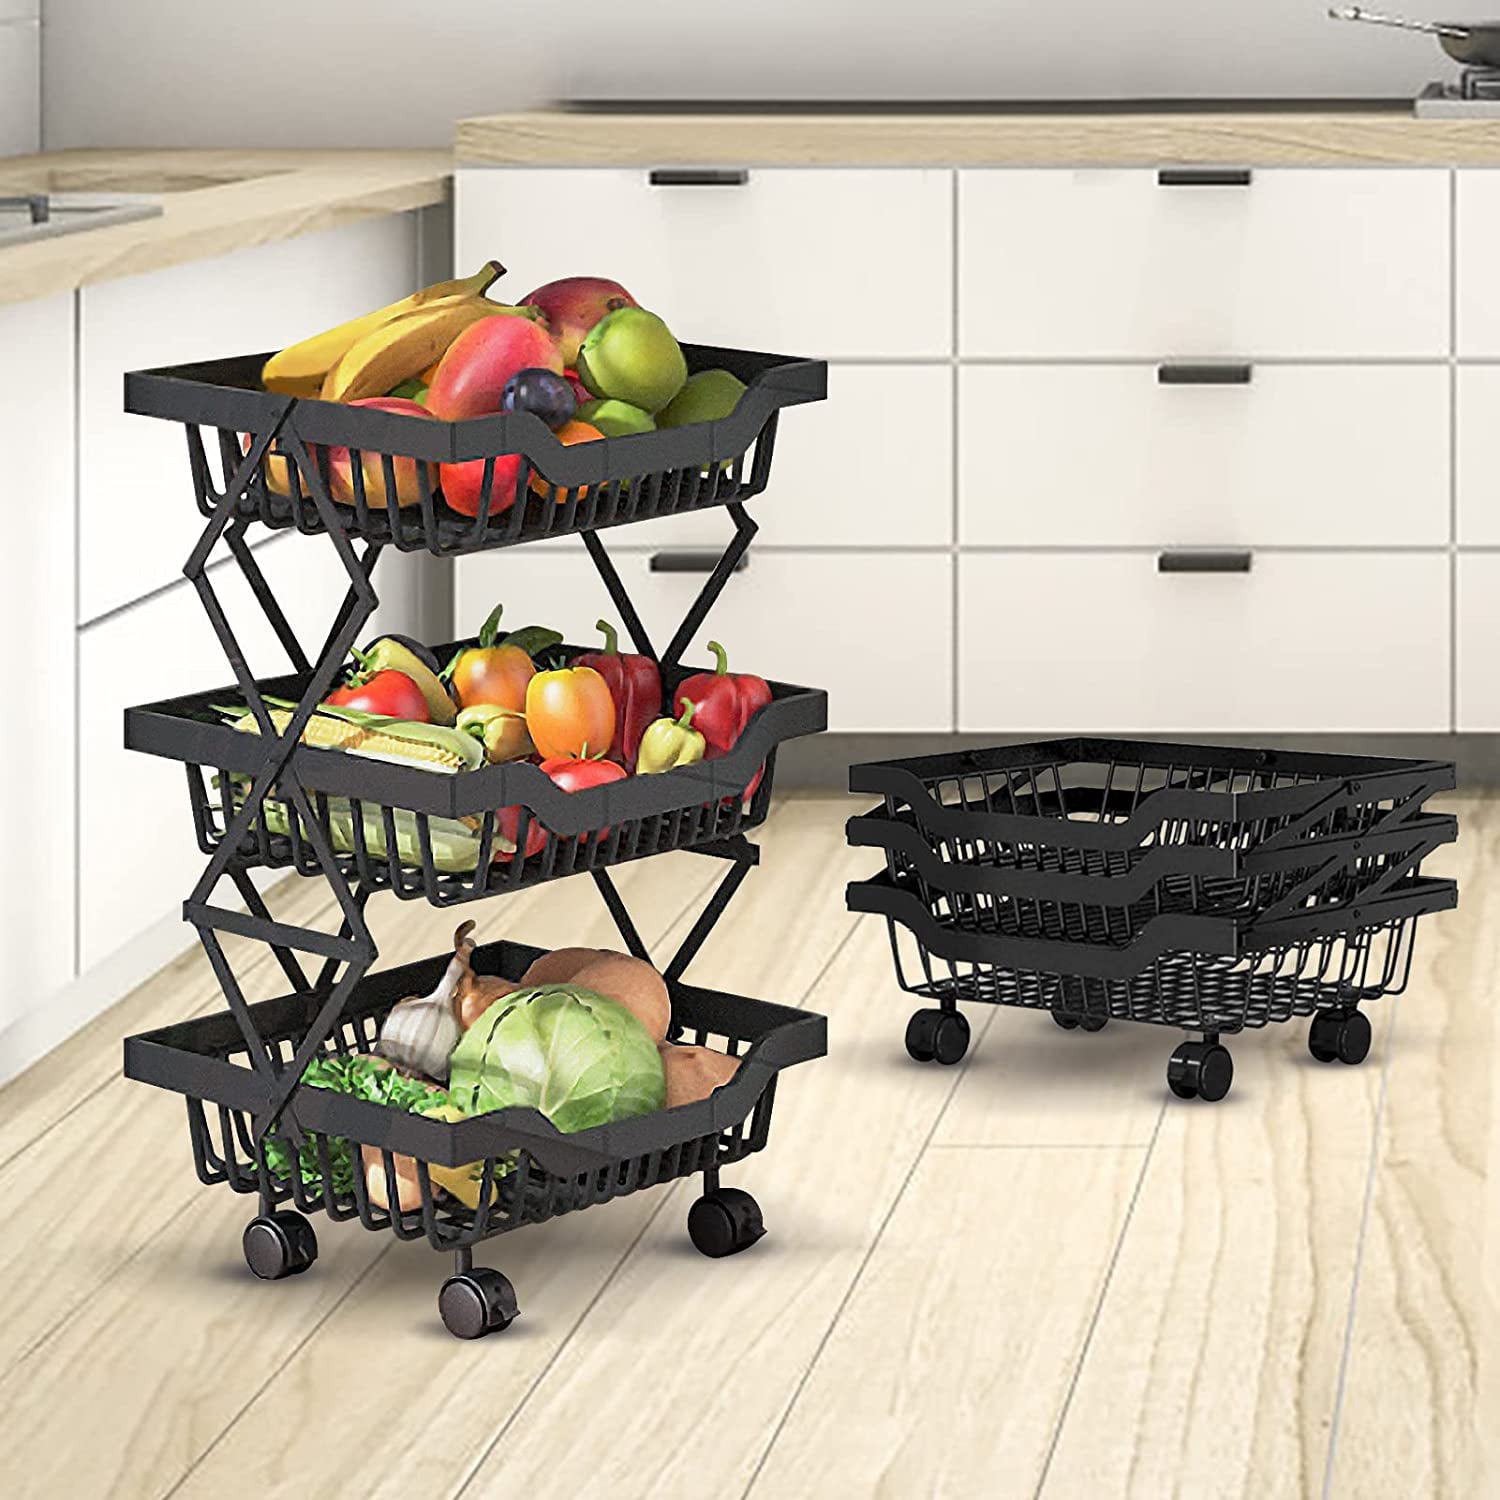 Fruit Basket for Kitchen - 3 Tier Basket Stand - Foldable Fruit and Vegetable Storage Cart with Detachable Wheels - Potato and Onion Storage - Basket Storage Tower for Kitchen， Pantry， Bathroom